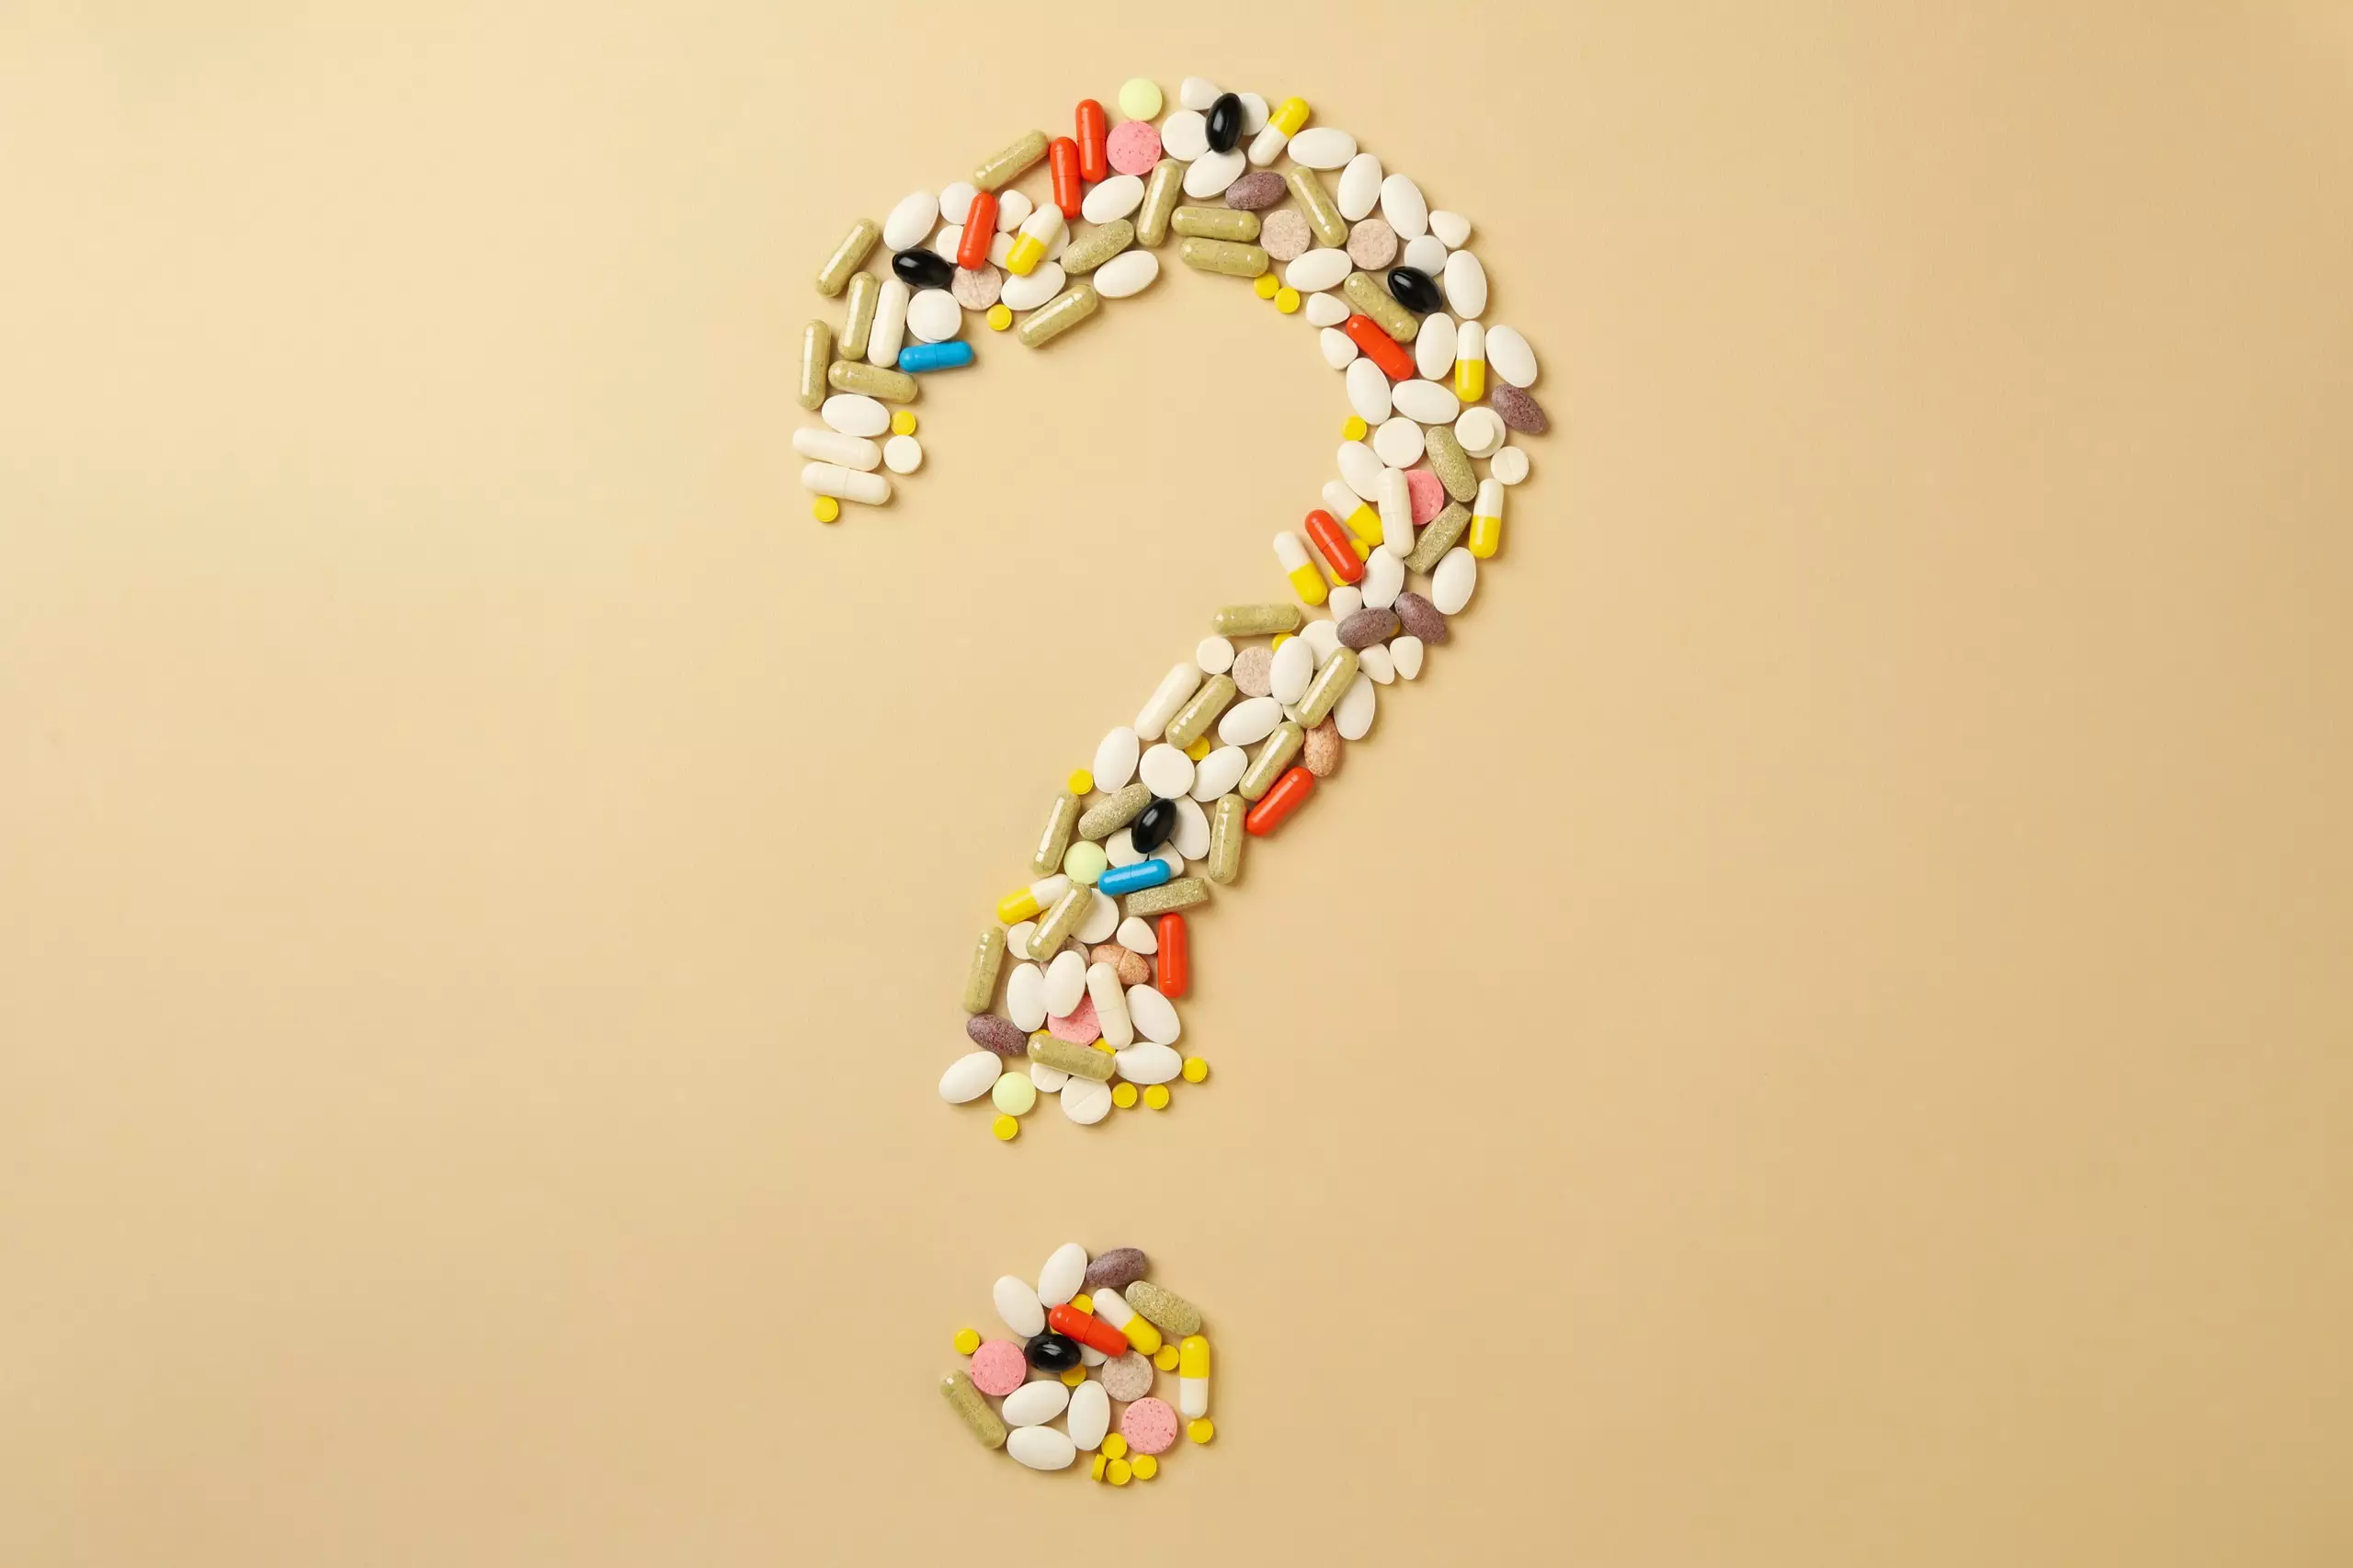 Question mark made of pills on beige background. Keto supplements concept.